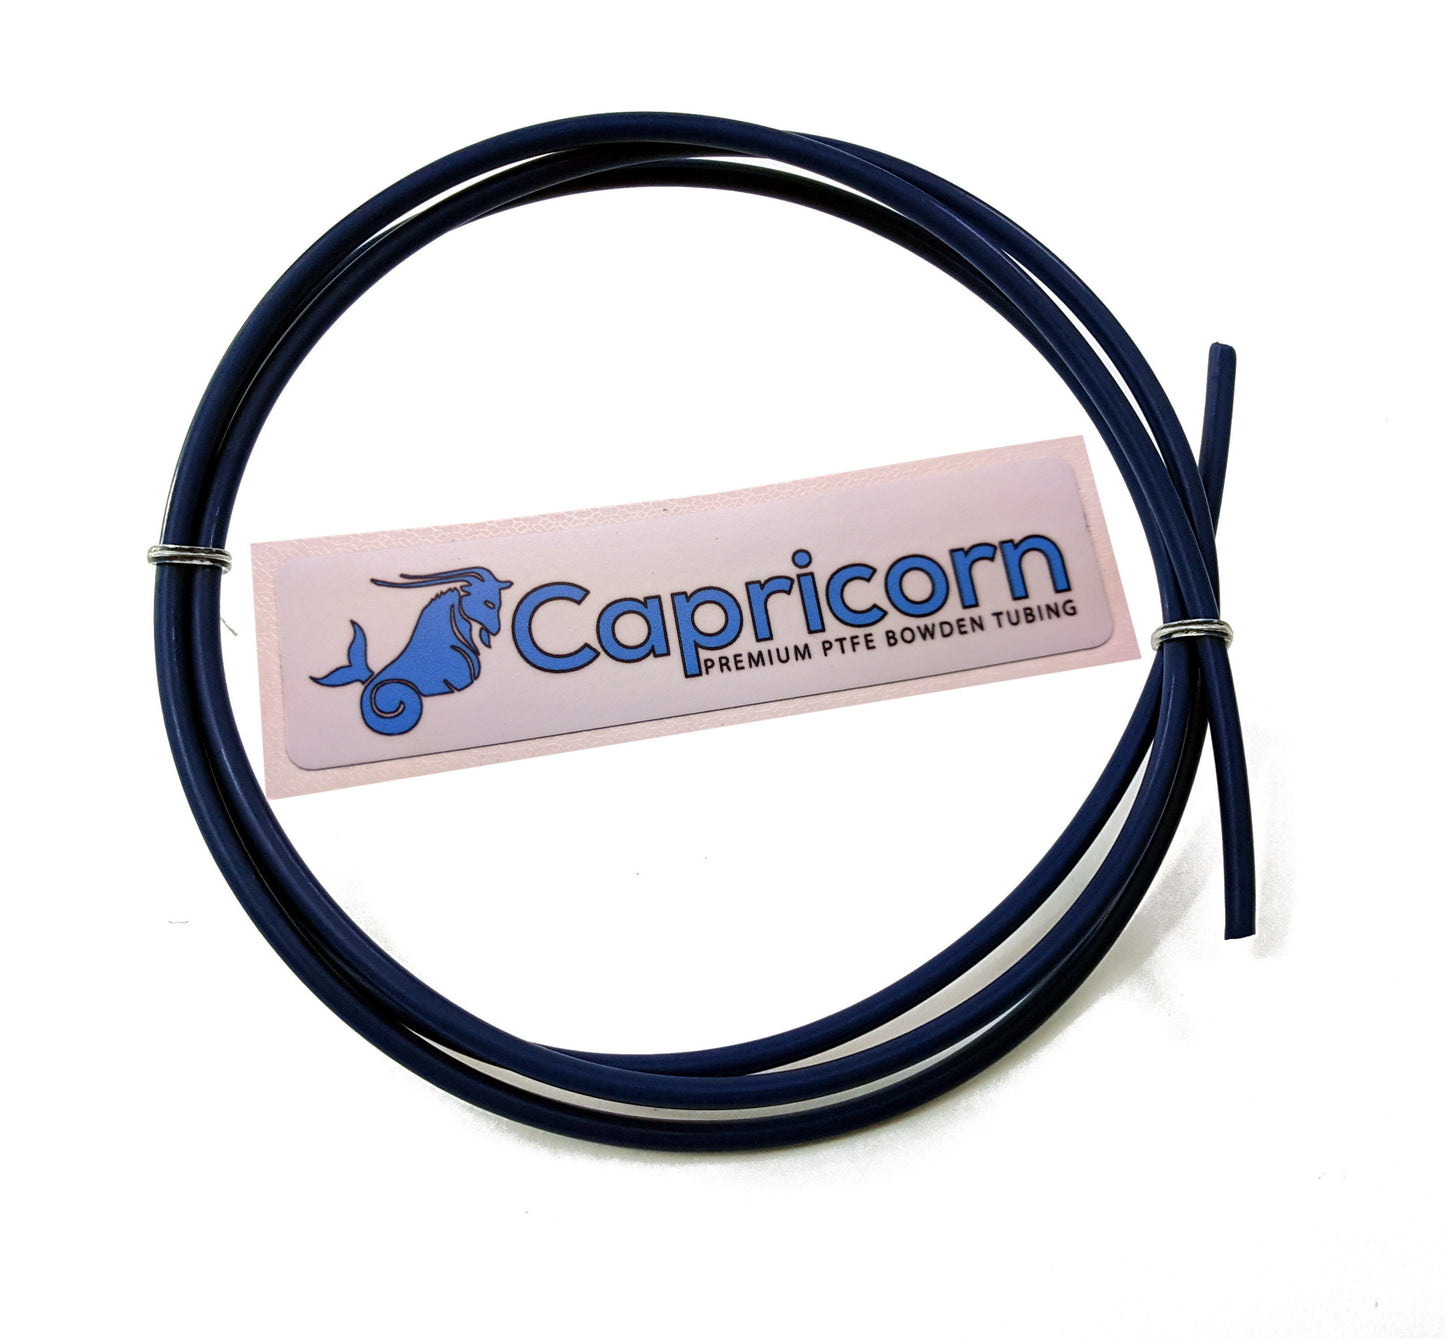 Capricorn XS Reduced Friction Bowden Tubing 1.75mm